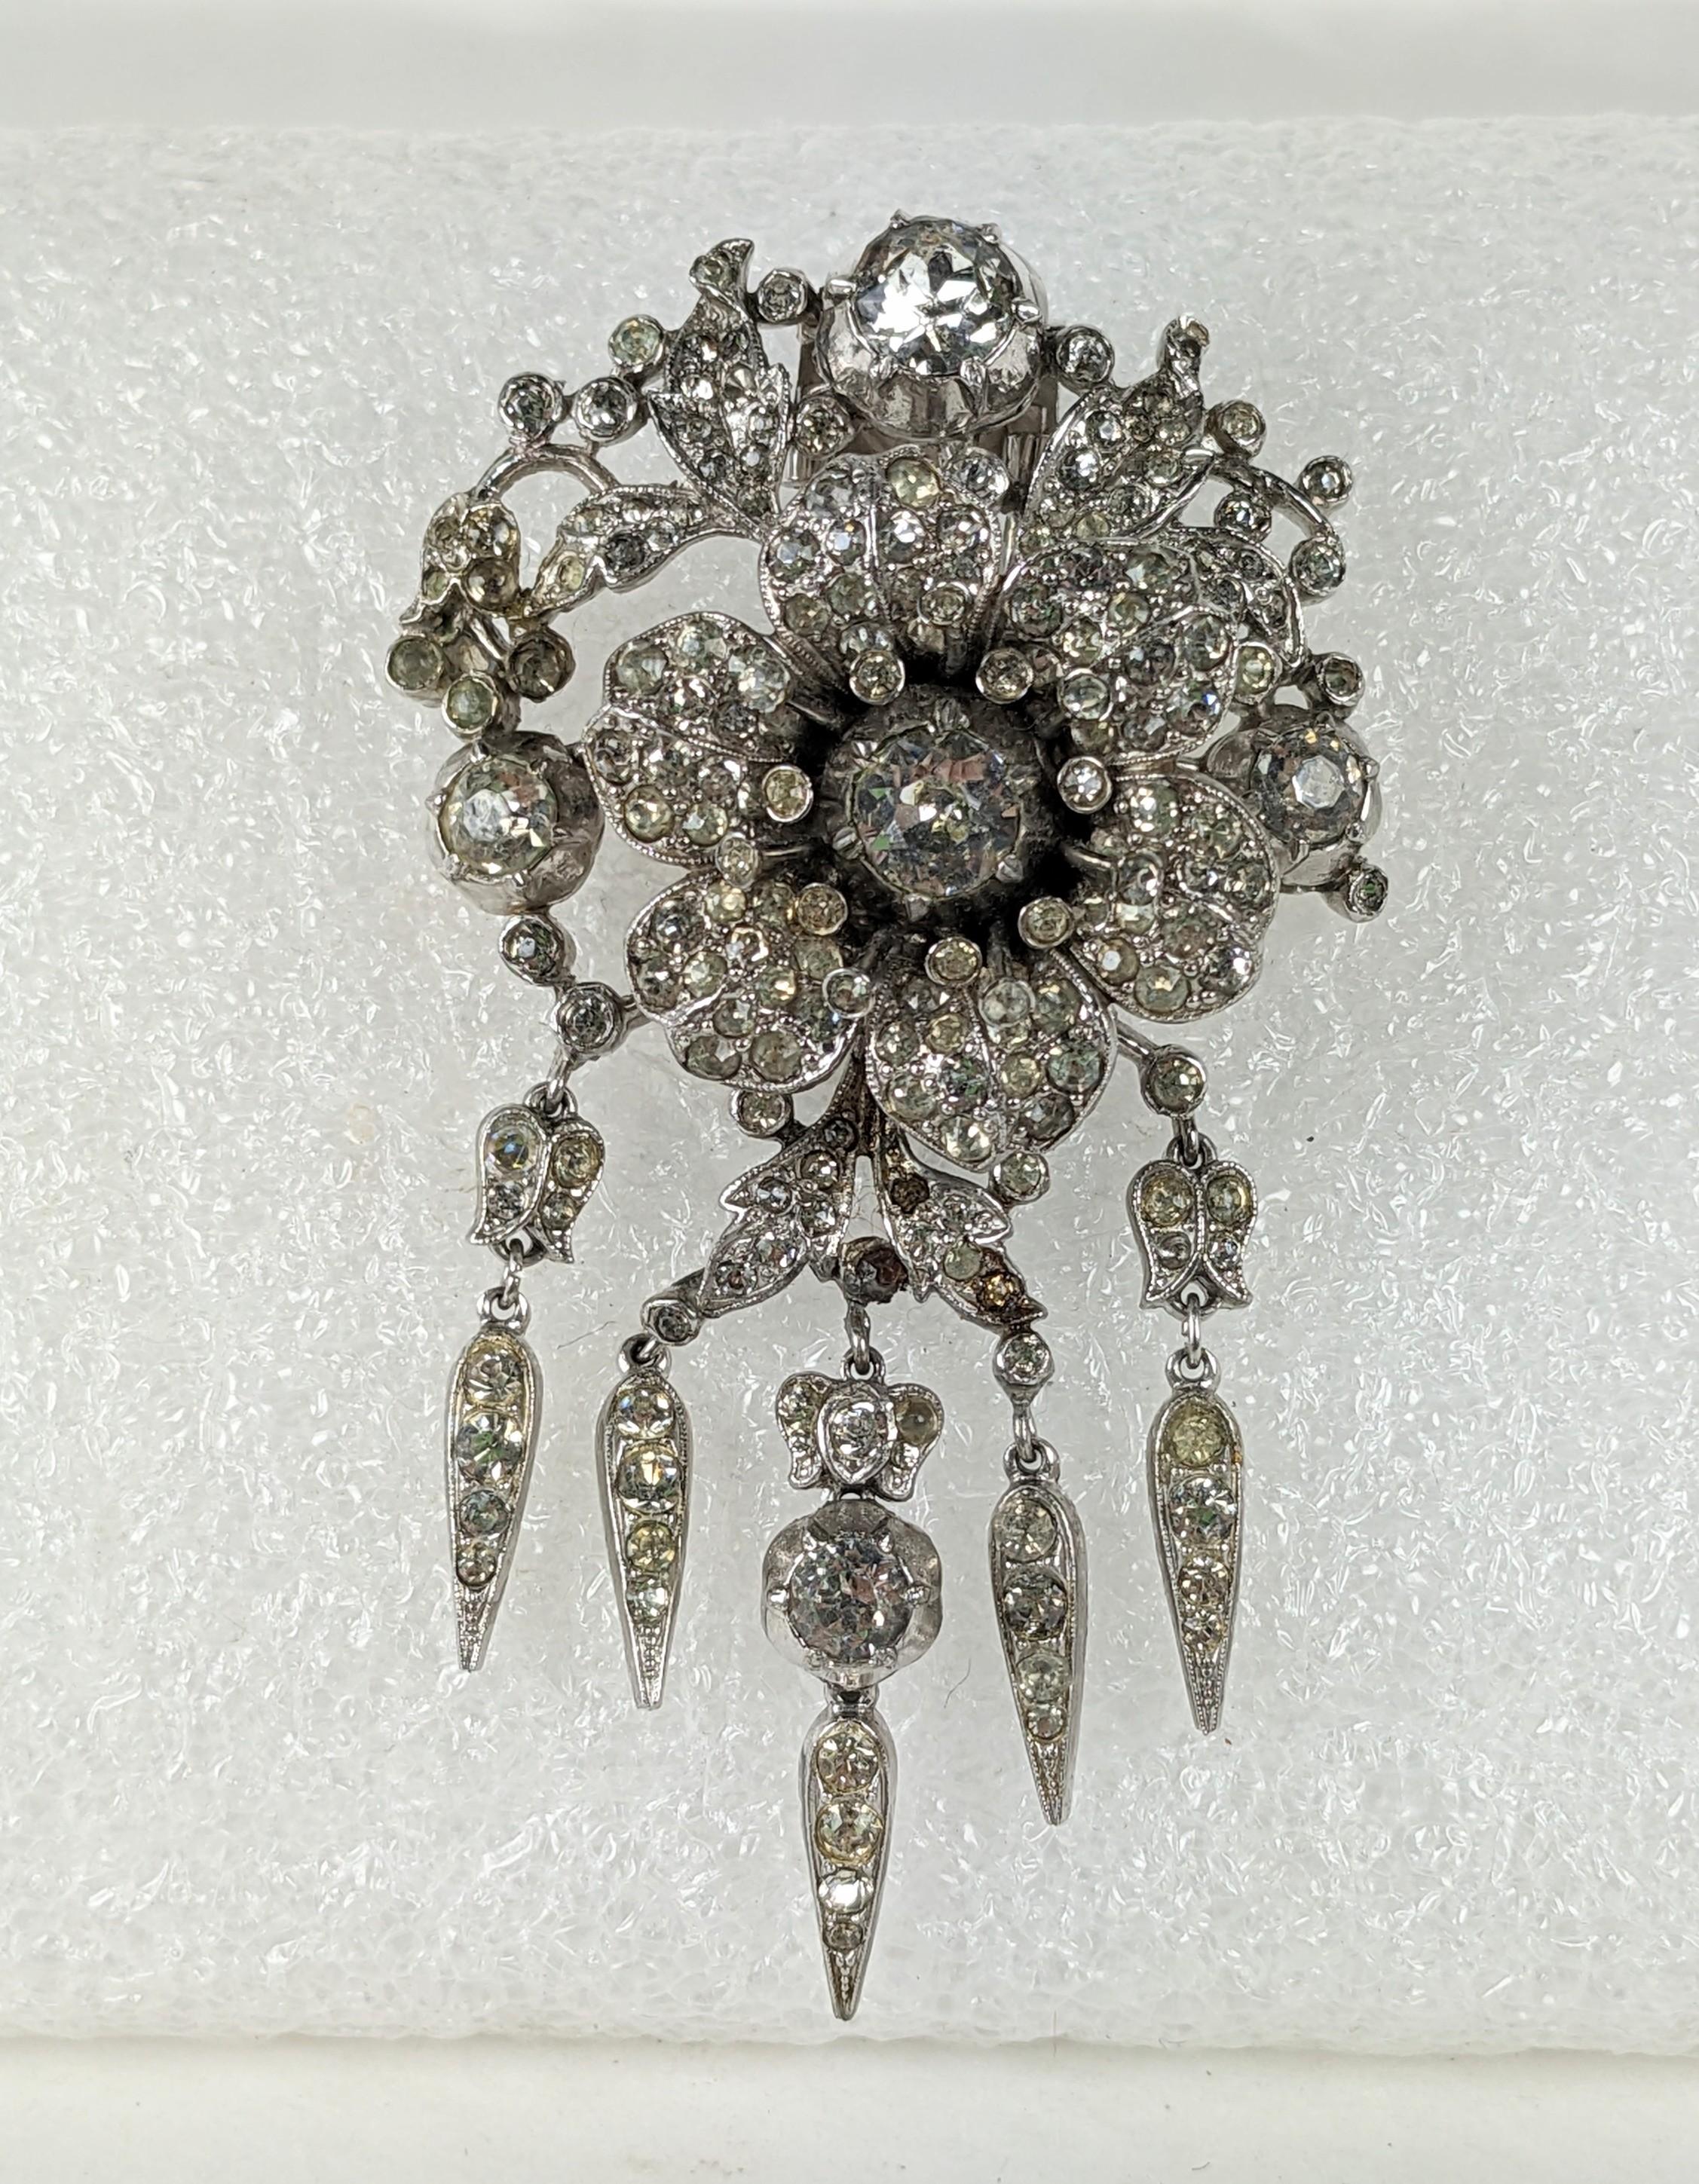 Trifari 'Alfred Philippe' 'Regence' Pave Rose Flower with Spangles and Six Radiant Leaves Pin Clip of rhodium plate base metal, rhinestones. The central rose trembles, all based on 18th Century diamond jewels. Marked: Trifari with Crown.
The series,